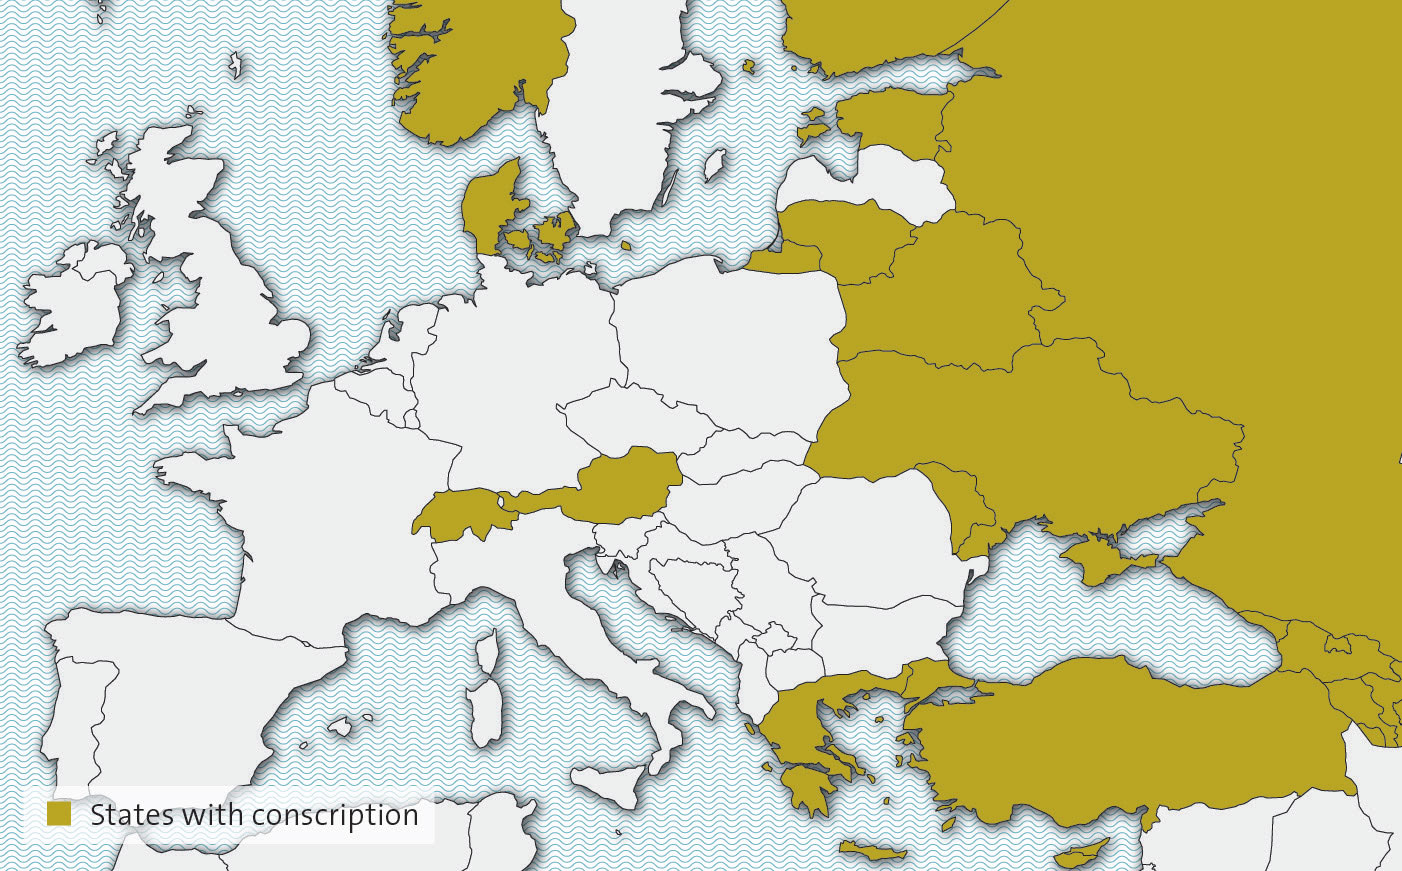 Enlarged view: A map of Europe showing states with conscription.